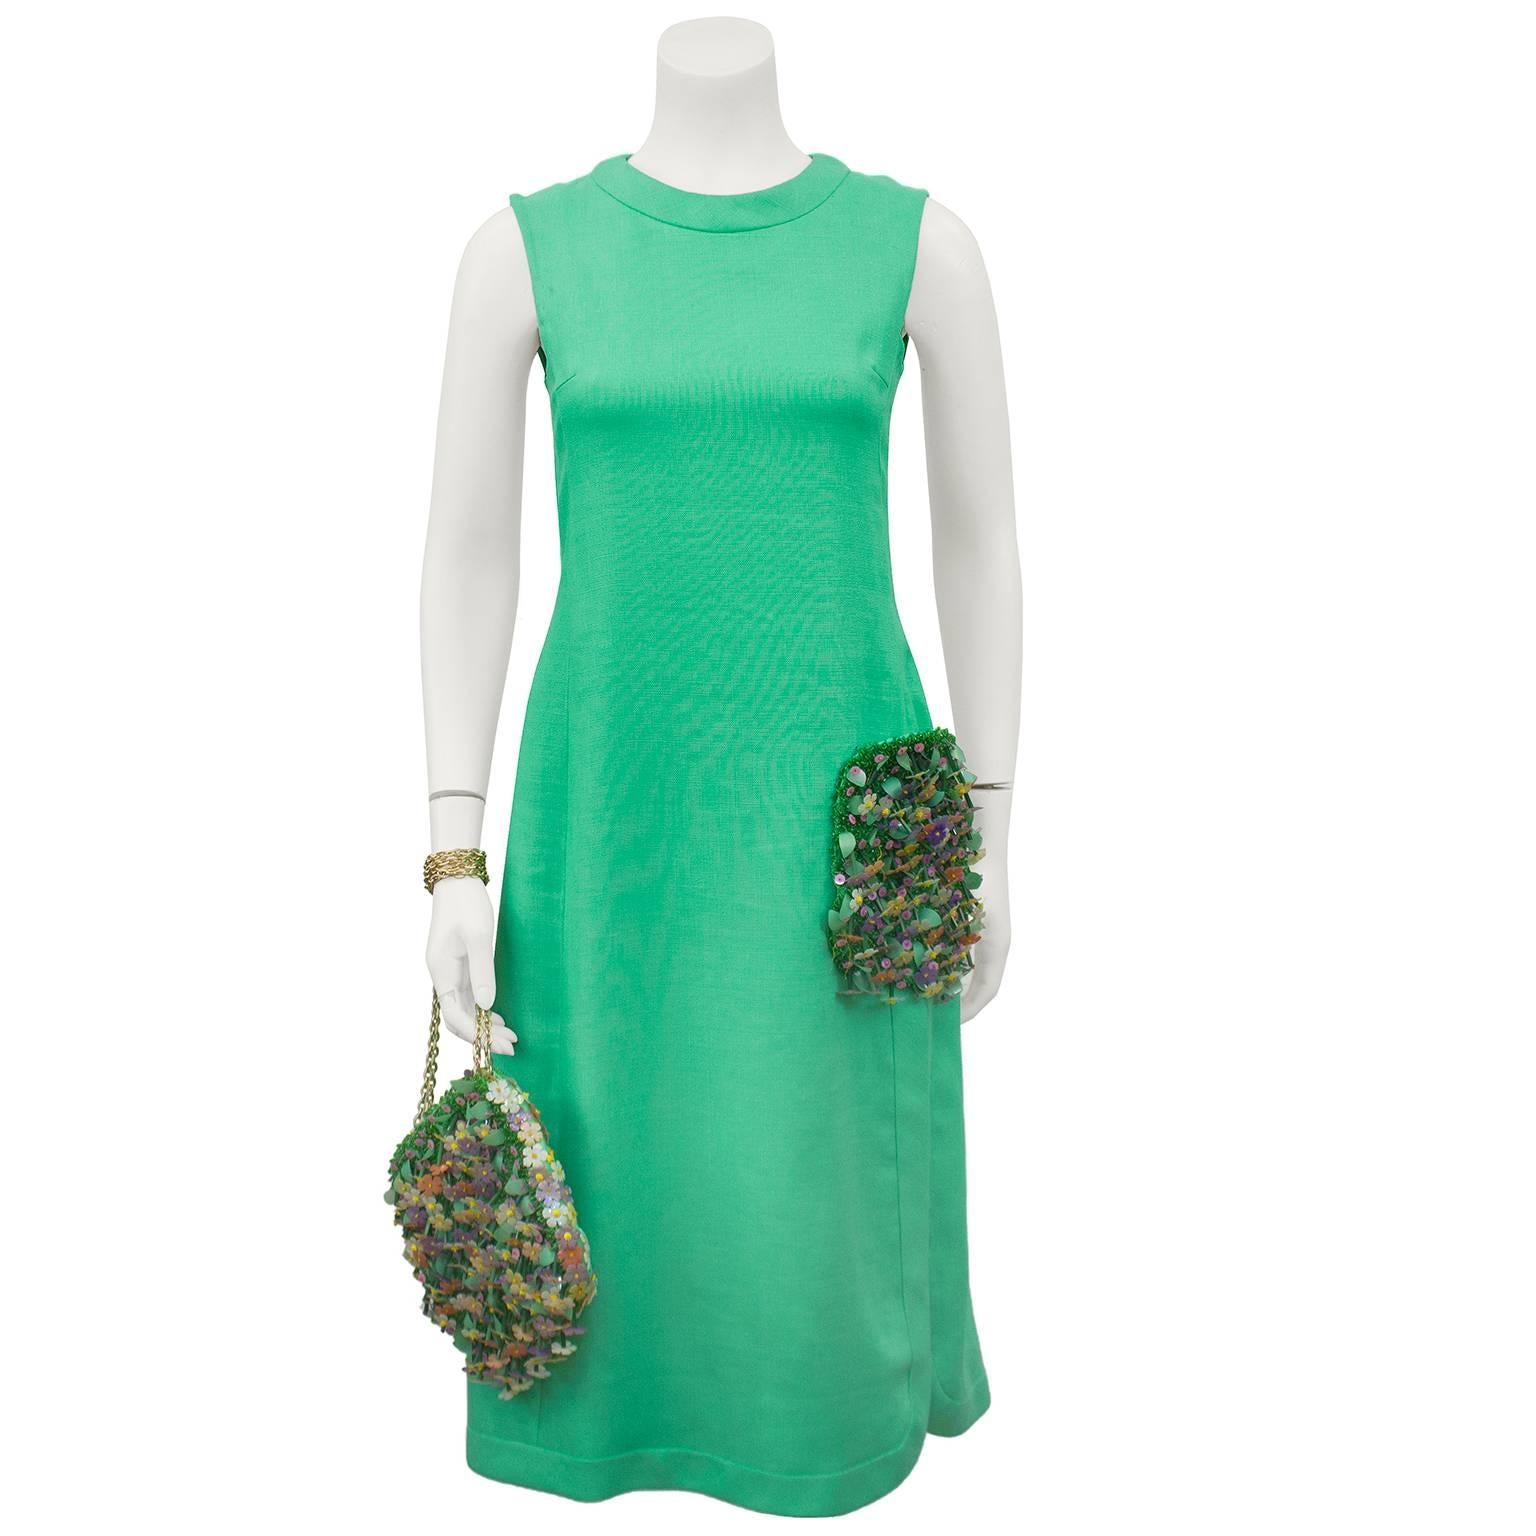 Canadian couturier Maggy Reeves spring green linen dress from the 1960s. Chic and simple sheath style dress with vertical seams down the body, tie at back/waist and zipper up the back. Accented with fabulous 3-D hand beaded side hip pocket and